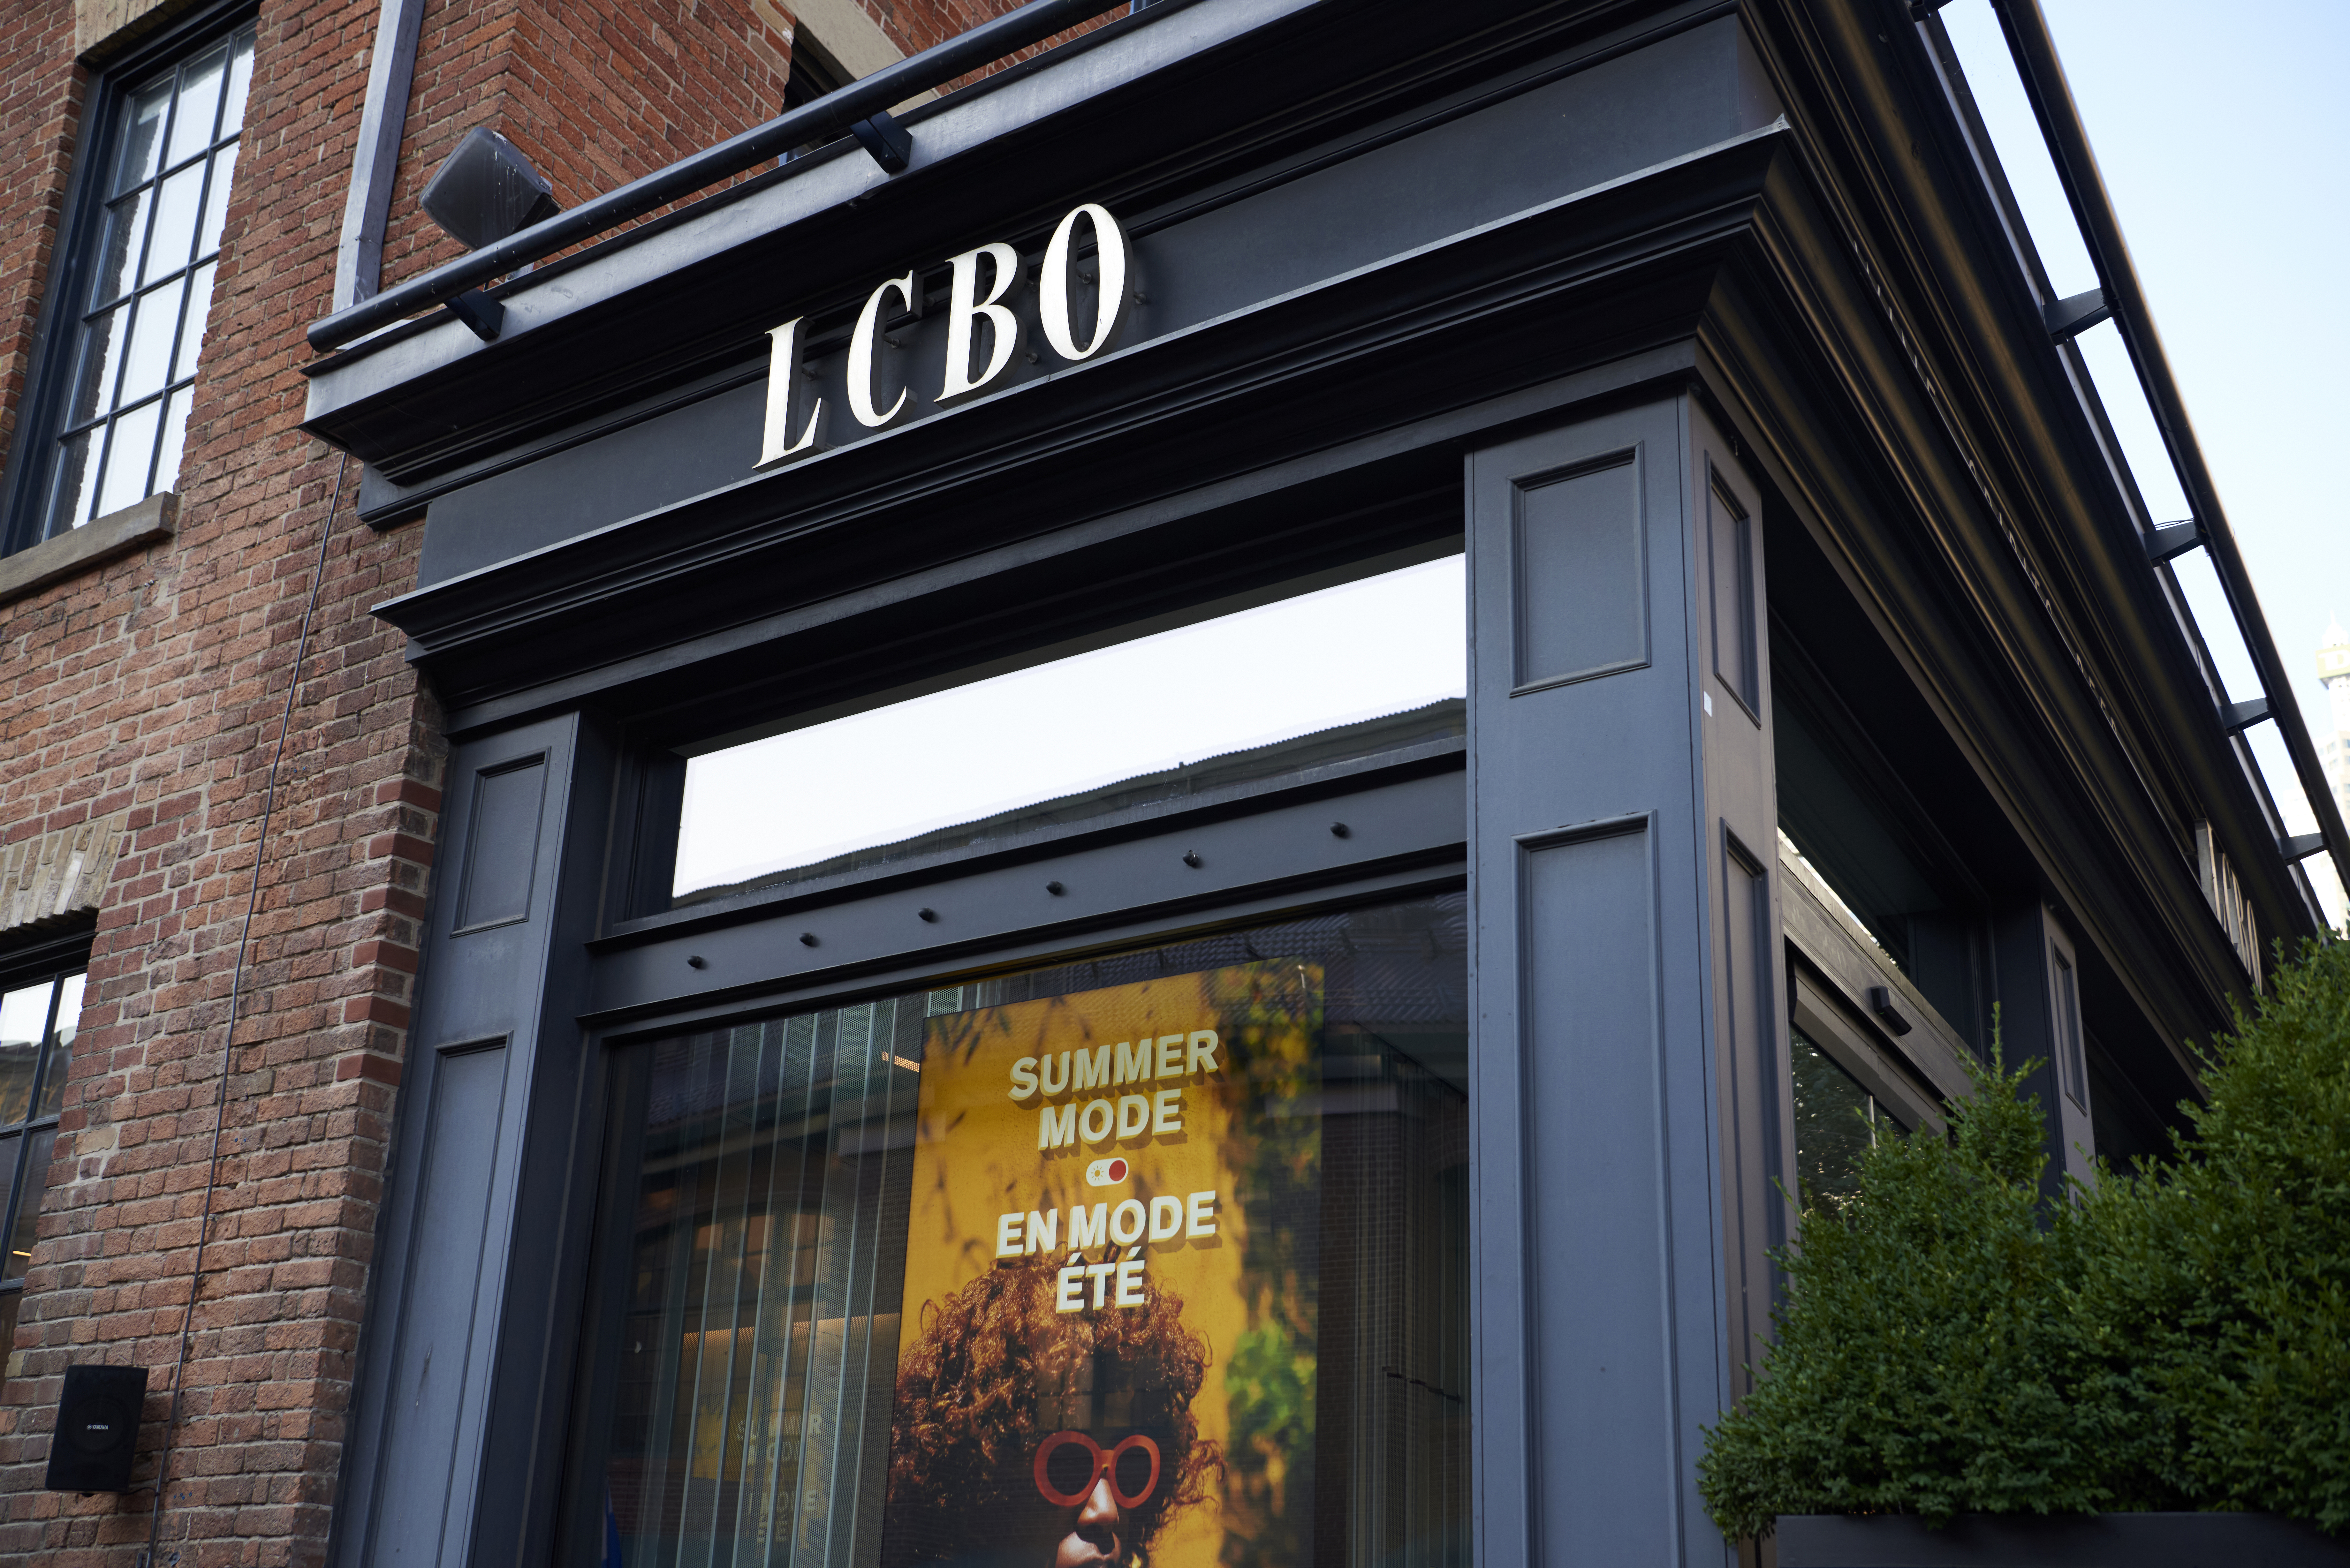 LCBO workers vote overwhelmingly in favour of strike action